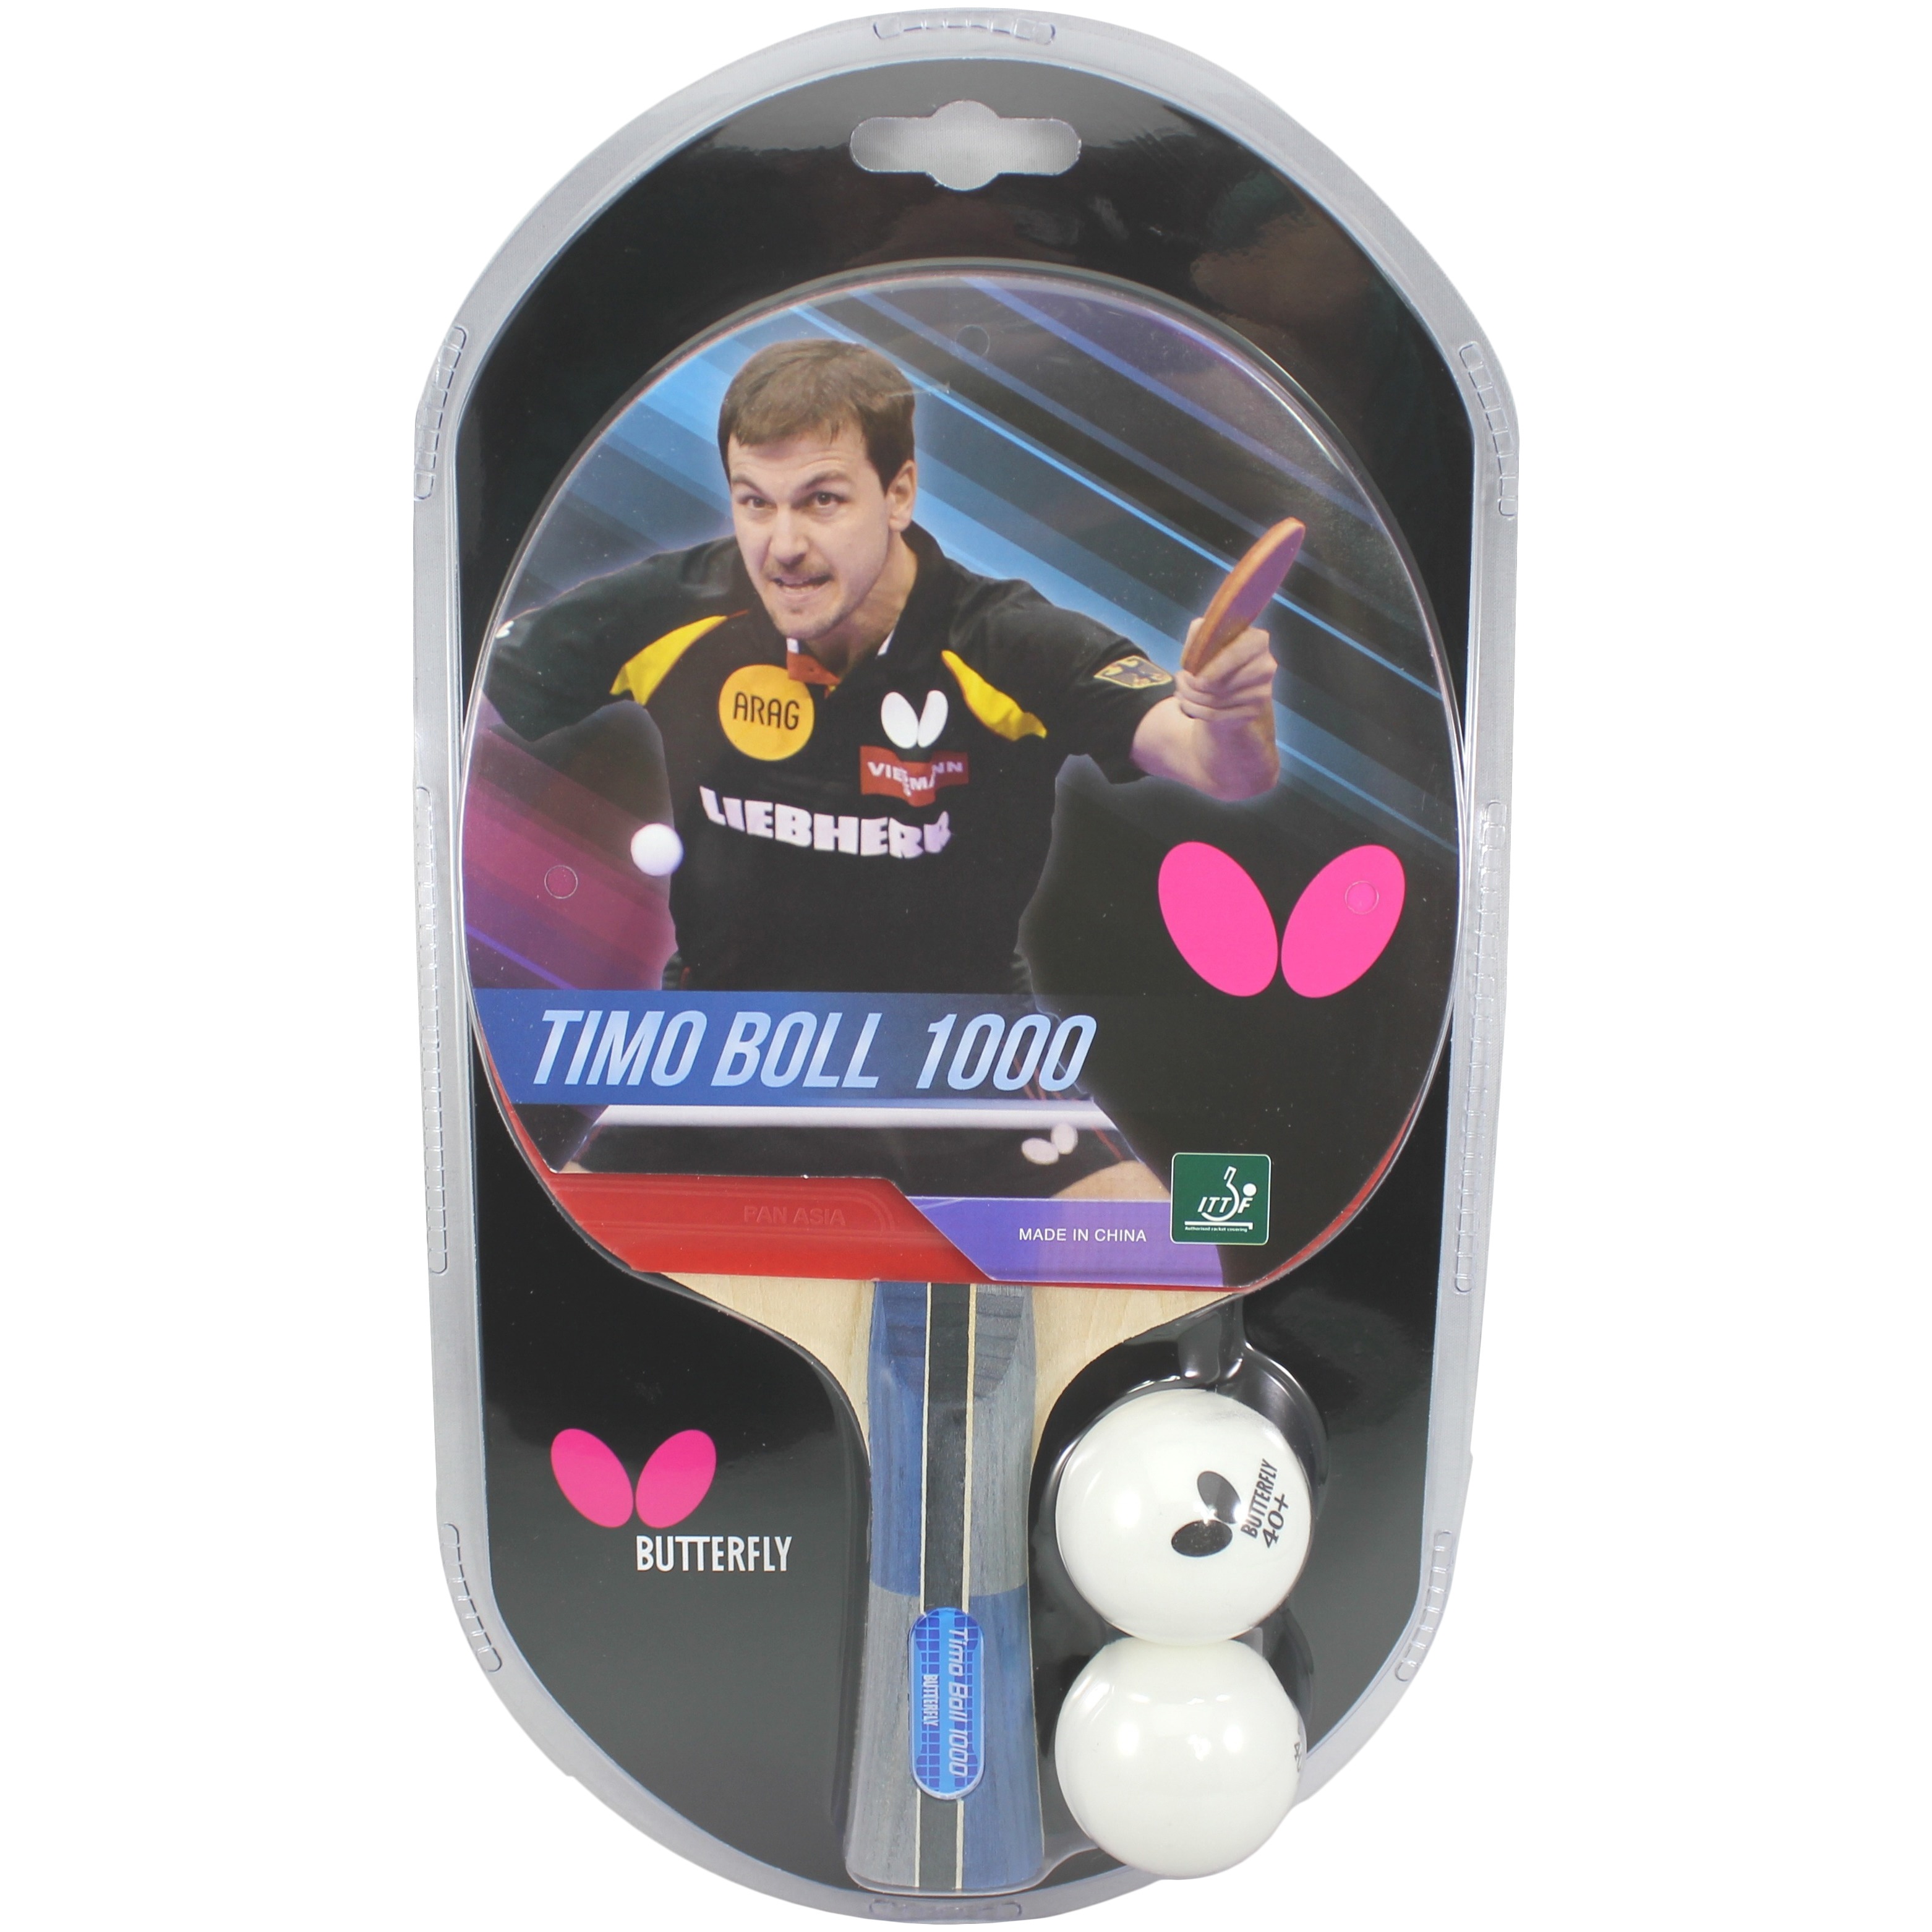 Butterfly Timo Boll 1000 Ping Pong Paddle Table Tennis Racket 